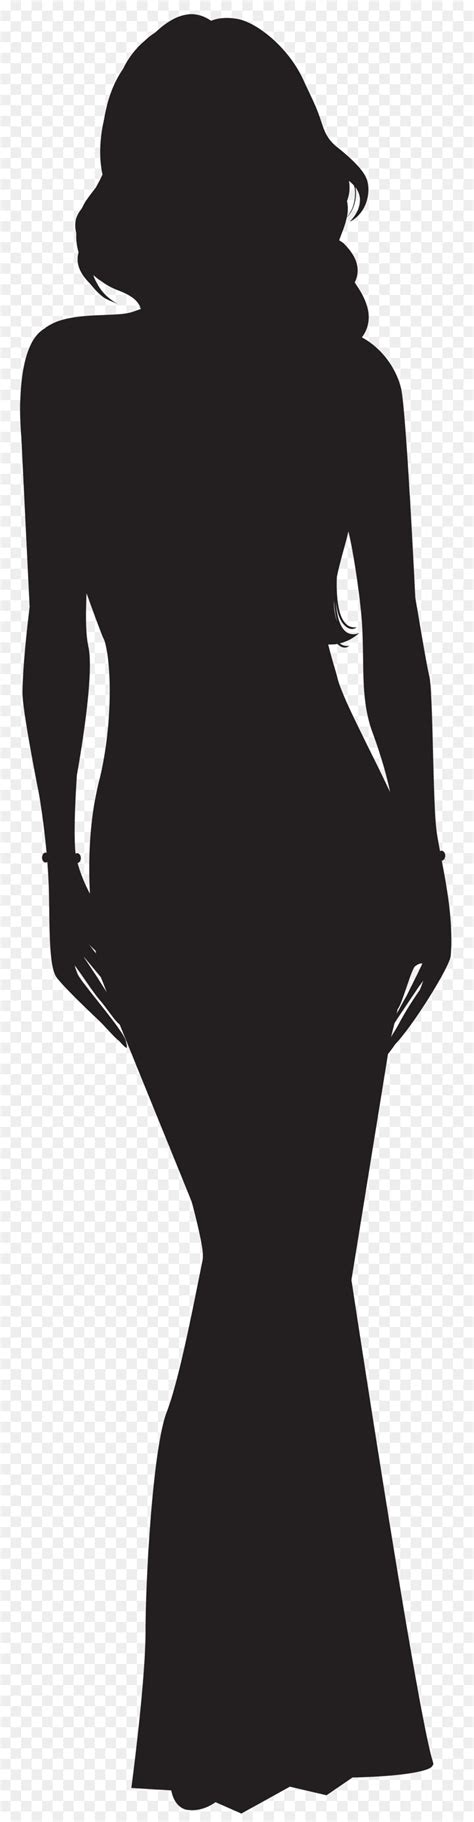 Free Silhouette Of A Black Woman Download Free Silhouette Of A Black